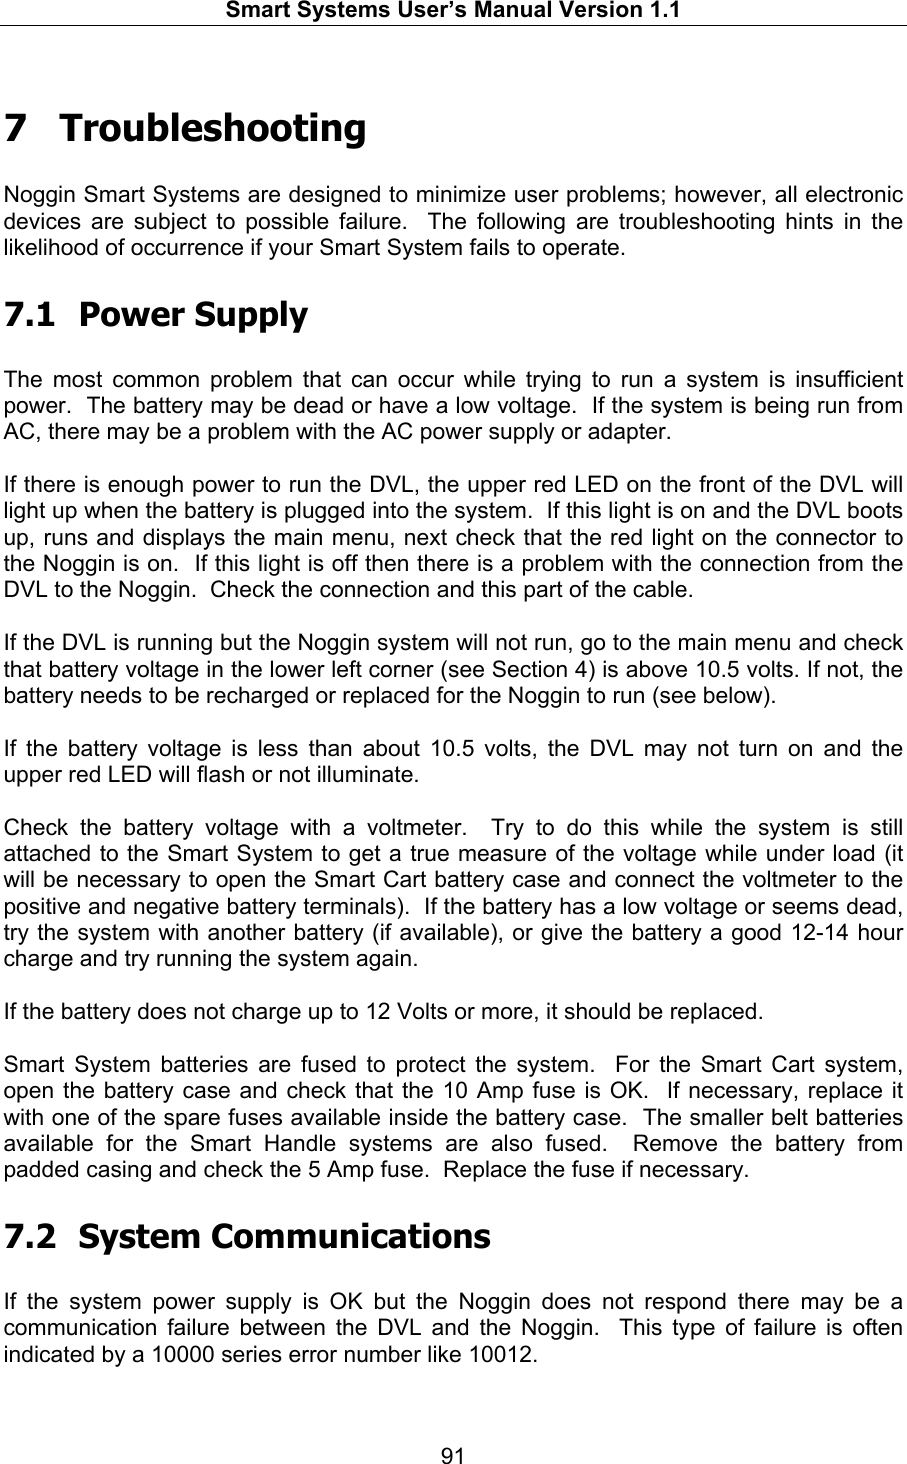   Smart Systems User’s Manual Version 1.1  91   7  Troubleshooting  Noggin Smart Systems are designed to minimize user problems; however, all electronic devices are subject to possible failure.  The following are troubleshooting hints in the likelihood of occurrence if your Smart System fails to operate.  7.1 Power Supply  The most common problem that can occur while trying to run a system is insufficient power.  The battery may be dead or have a low voltage.  If the system is being run from AC, there may be a problem with the AC power supply or adapter.   If there is enough power to run the DVL, the upper red LED on the front of the DVL will light up when the battery is plugged into the system.  If this light is on and the DVL boots up, runs and displays the main menu, next check that the red light on the connector to the Noggin is on.  If this light is off then there is a problem with the connection from the DVL to the Noggin.  Check the connection and this part of the cable.  If the DVL is running but the Noggin system will not run, go to the main menu and check that battery voltage in the lower left corner (see Section 4) is above 10.5 volts. If not, the battery needs to be recharged or replaced for the Noggin to run (see below).  If the battery voltage is less than about 10.5 volts, the DVL may not turn on and the upper red LED will flash or not illuminate.  Check the battery voltage with a voltmeter.  Try to do this while the system is still attached to the Smart System to get a true measure of the voltage while under load (it will be necessary to open the Smart Cart battery case and connect the voltmeter to the positive and negative battery terminals).  If the battery has a low voltage or seems dead, try the system with another battery (if available), or give the battery a good 12-14 hour charge and try running the system again.    If the battery does not charge up to 12 Volts or more, it should be replaced.  Smart System batteries are fused to protect the system.  For the Smart Cart system, open the battery case and check that the 10 Amp fuse is OK.  If necessary, replace it with one of the spare fuses available inside the battery case.  The smaller belt batteries available for the Smart Handle systems are also fused.  Remove the battery from padded casing and check the 5 Amp fuse.  Replace the fuse if necessary.    7.2 System Communications  If the system power supply is OK but the Noggin does not respond there may be a communication failure between the DVL and the Noggin.  This type of failure is often indicated by a 10000 series error number like 10012.     